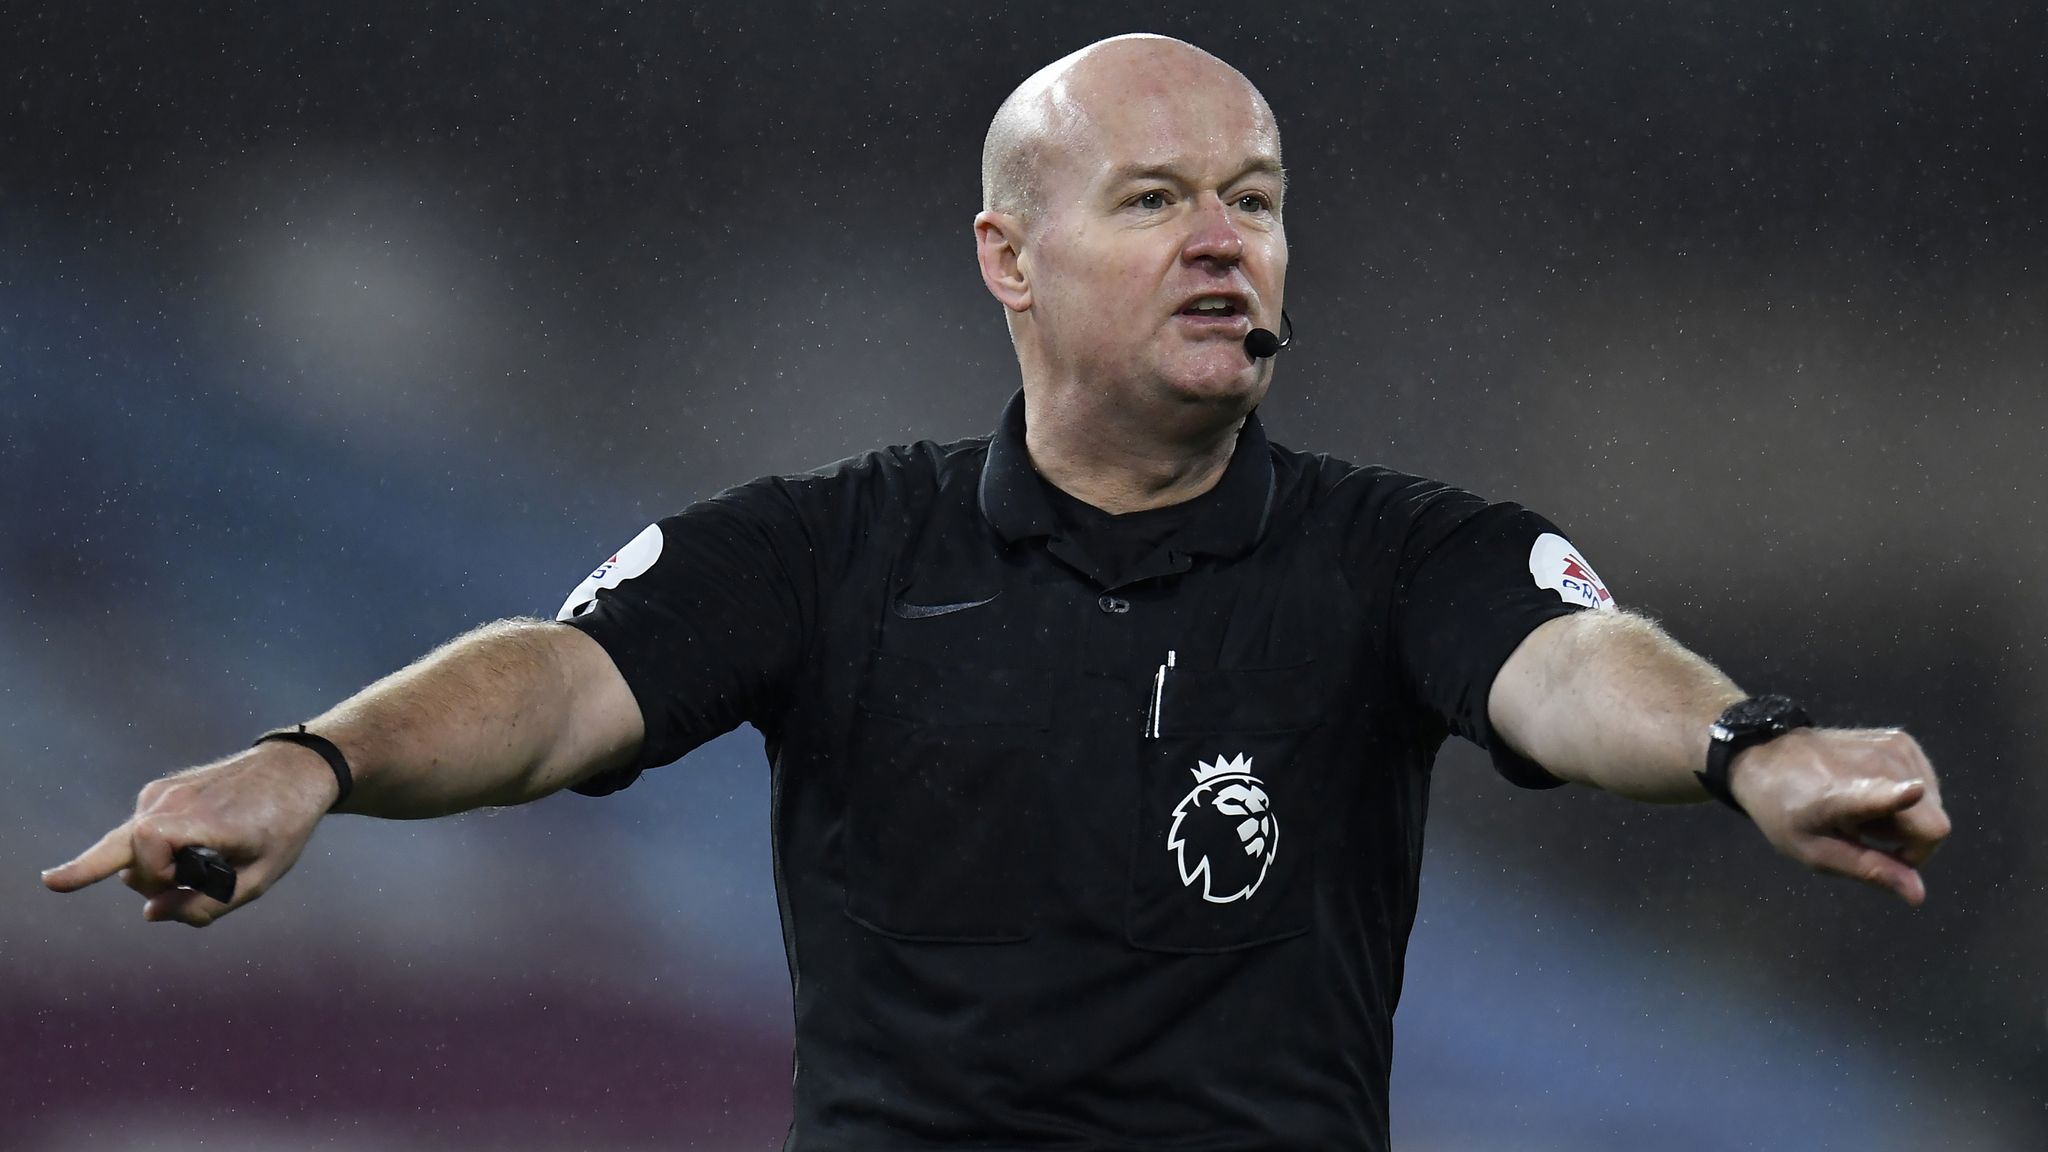 Lee Mason: Video Assistant Referee leaves PGMOL and will no longer work on  Premier League games after error cost Arsenal vs Brentford | Football News  | Sky Sports